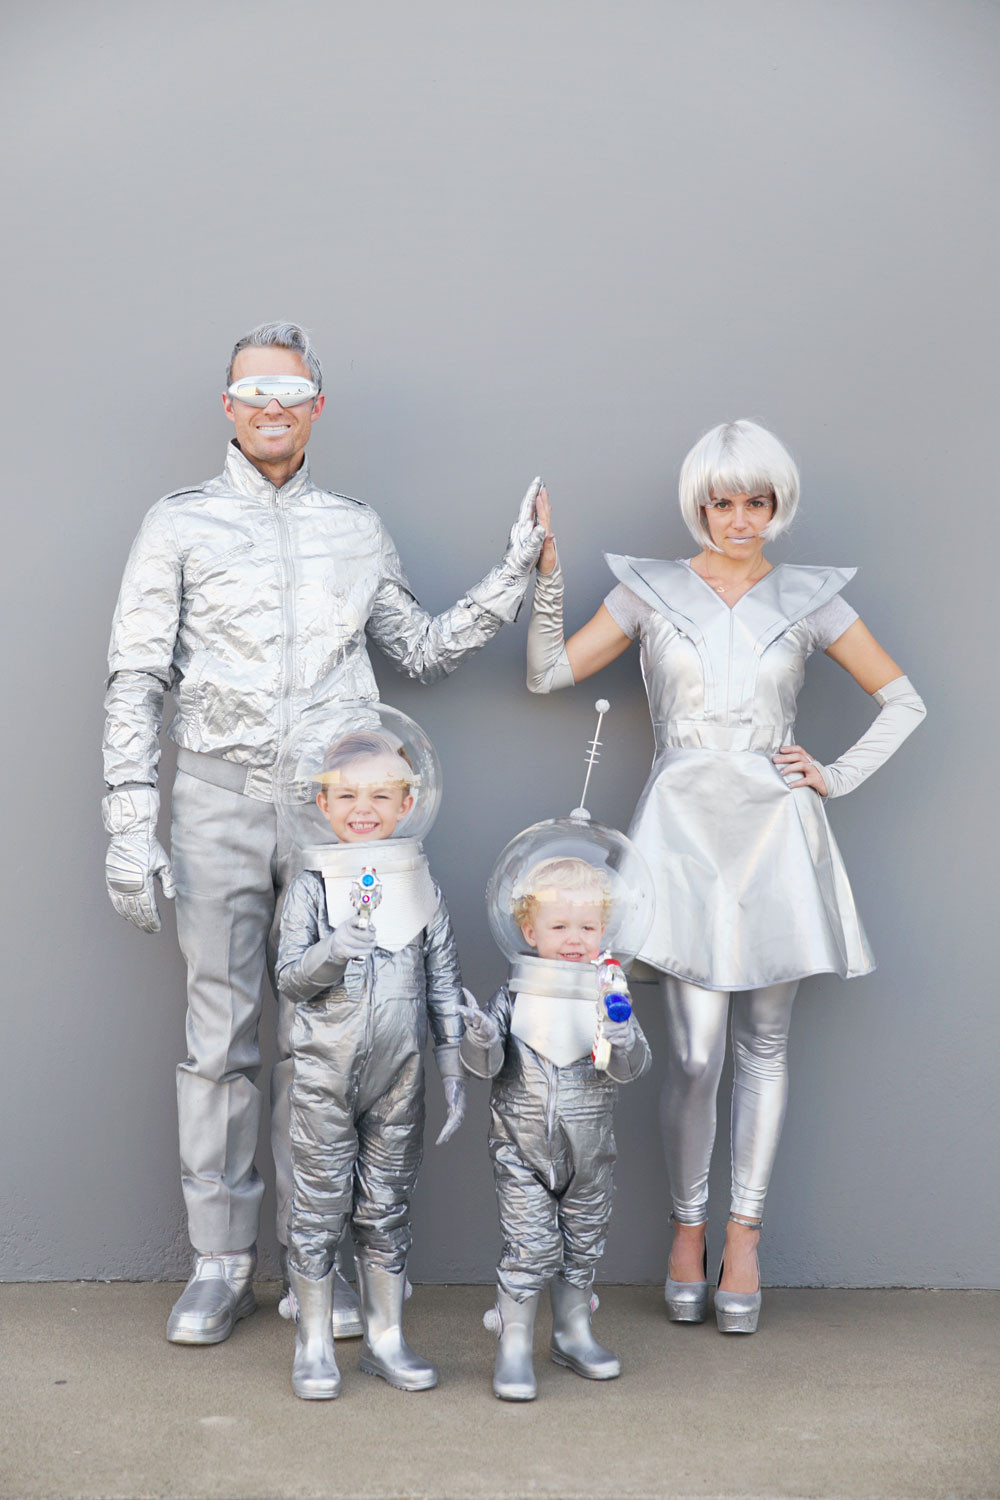 DIY Kids Costume Ideas
 DIY SPACE FAMILY COSTUMES Tell Love and Party